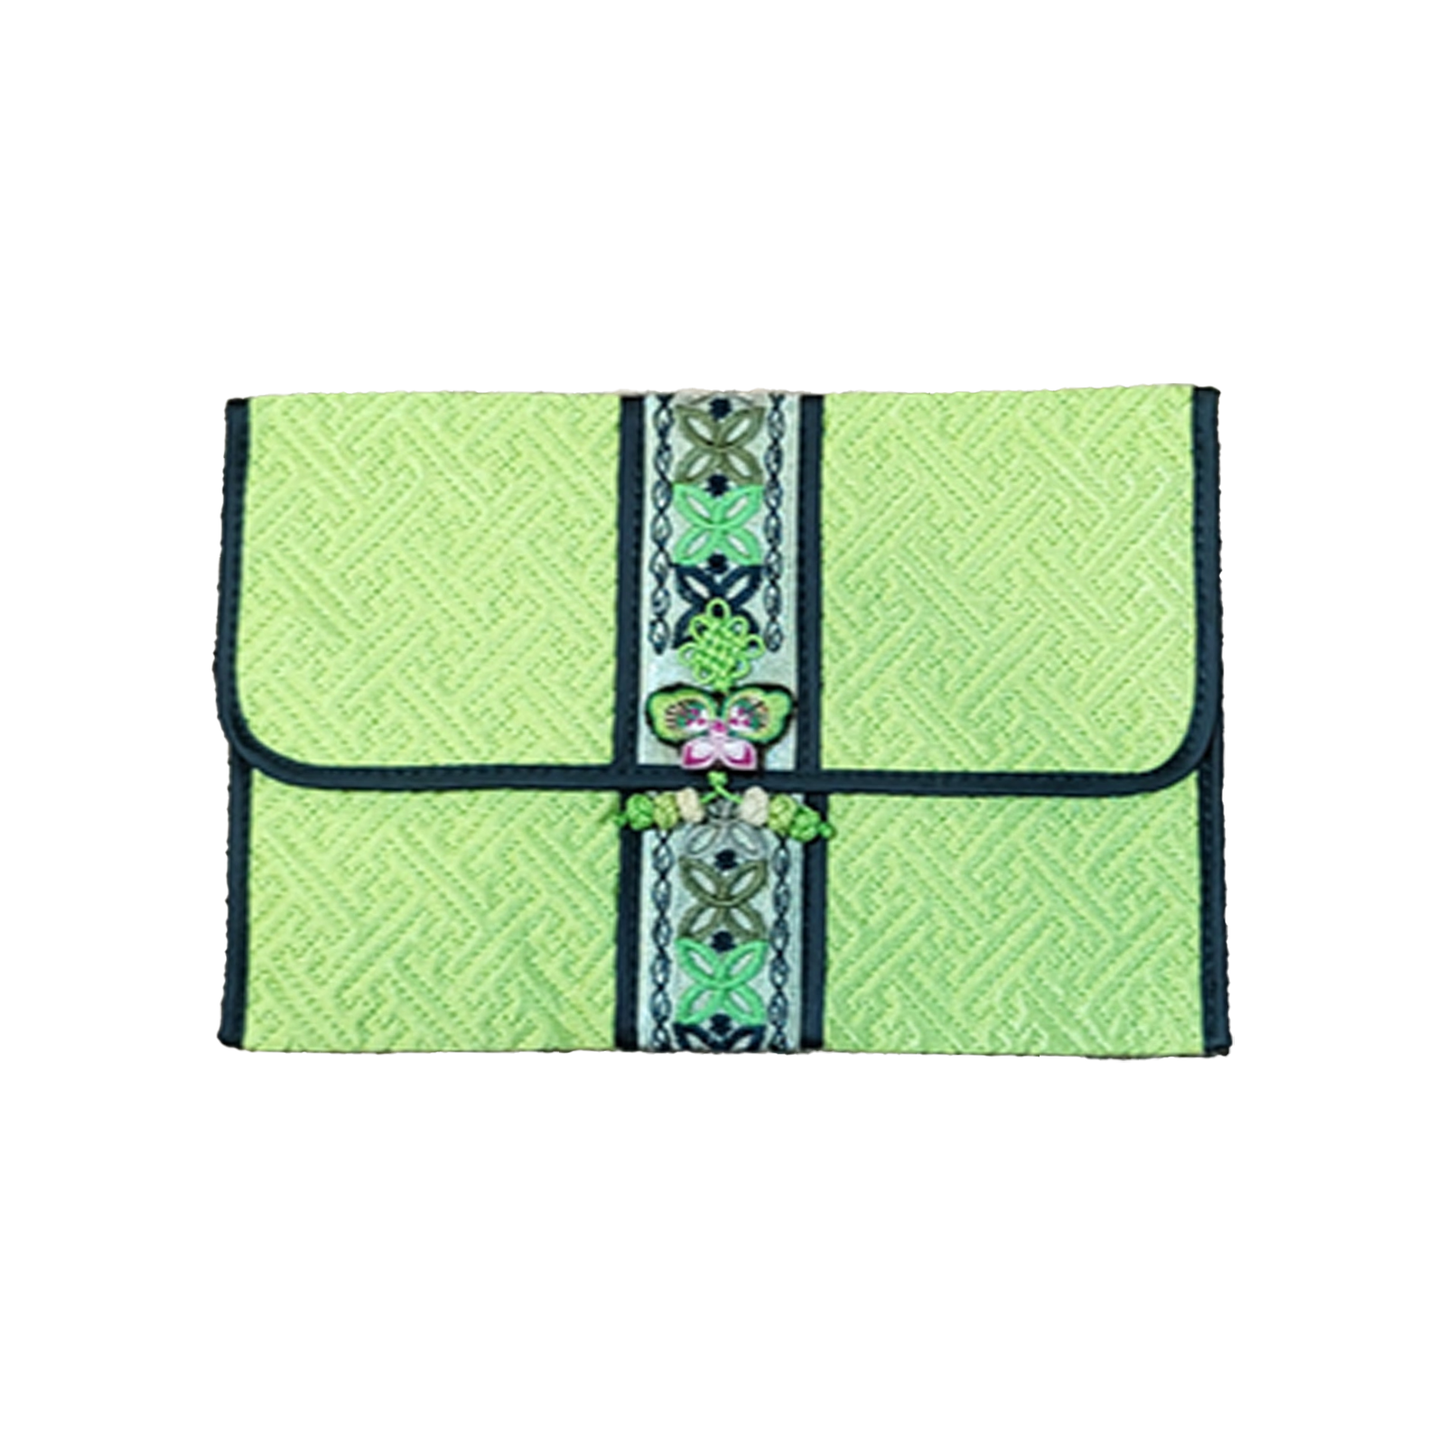 Simple purse with Korea Traditional Knot(Maedeup) and Embroidery, Yellow-green color